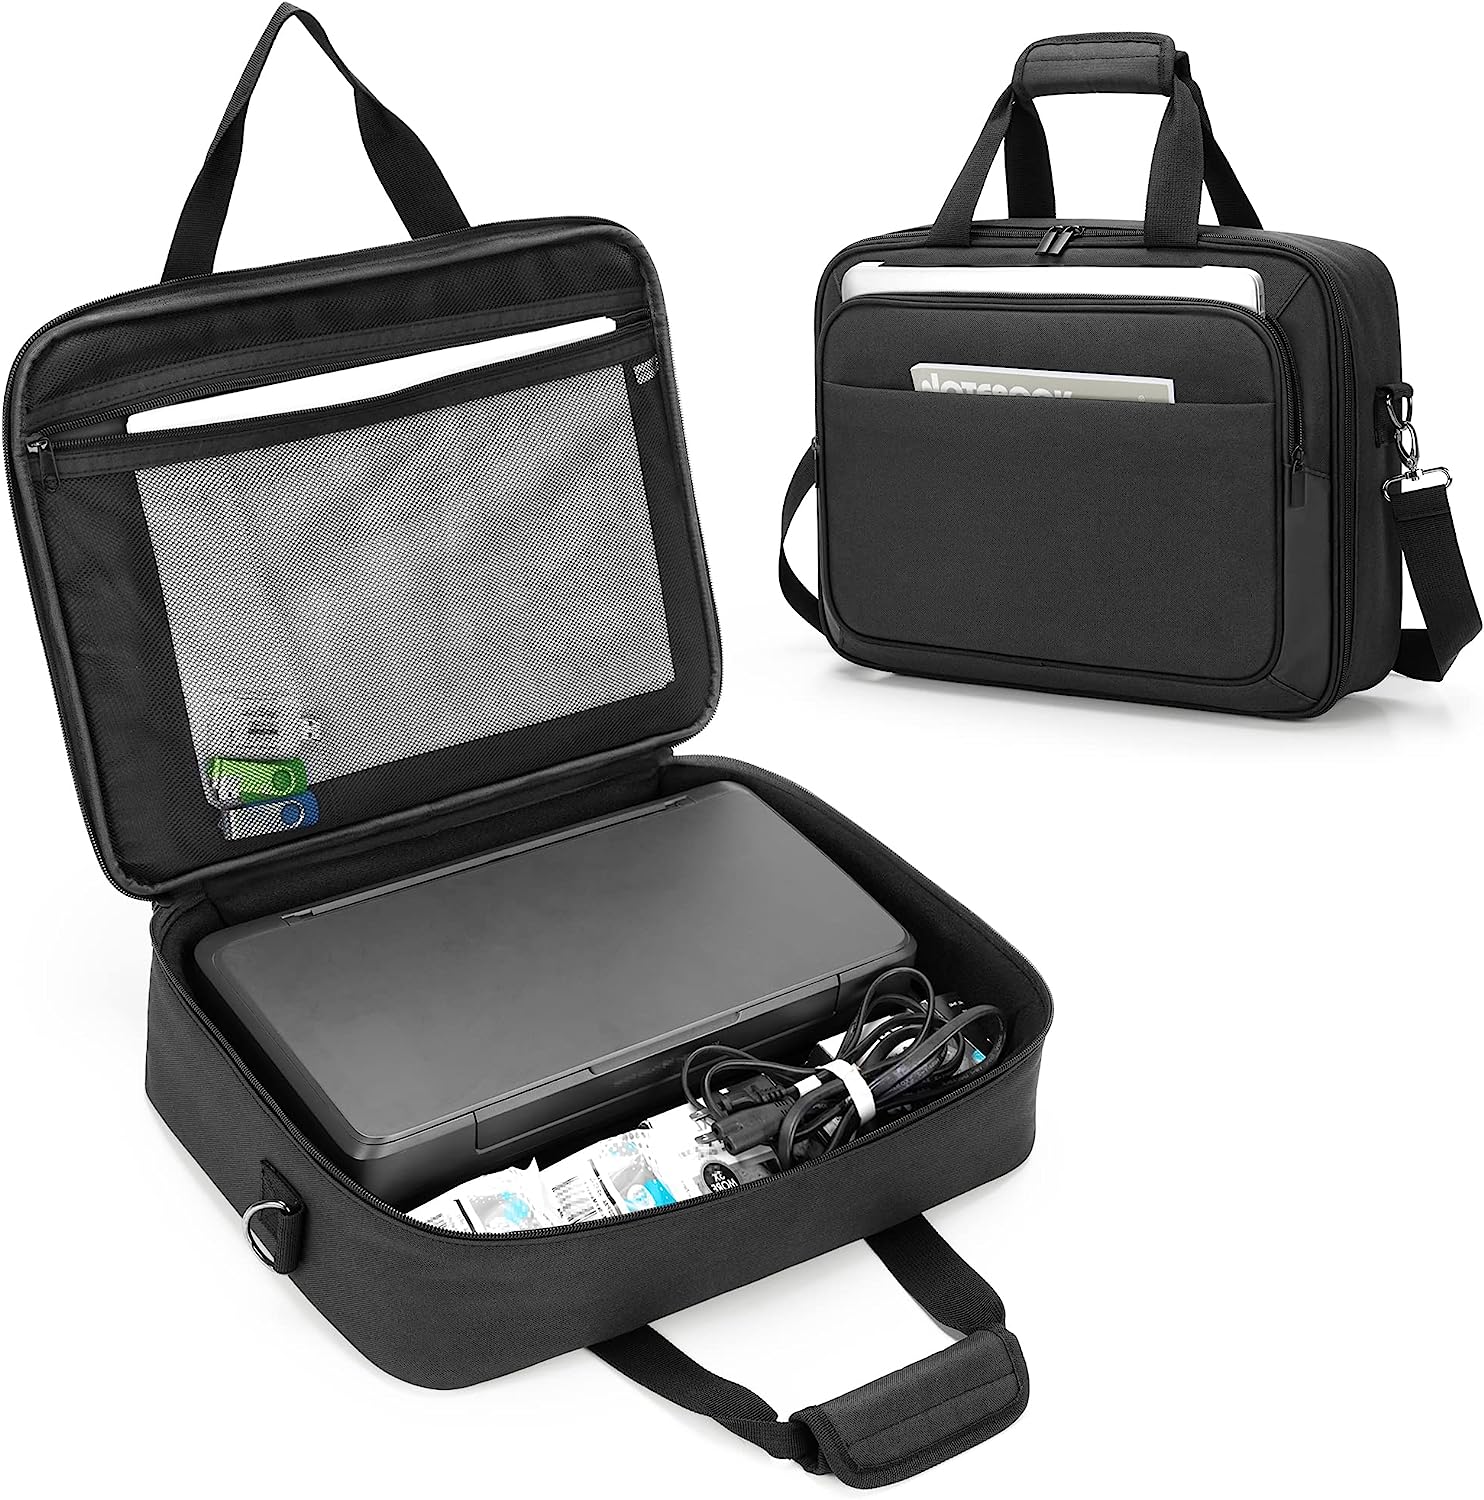 SAMDEW Mobile Printer Storage Bag Compatible with HP Tango/Tango X, HP Officejet 250/200, Portable Printer Carrying Case for Travel, with Laptop Layer(up to 14″), Shoulder & Trolley Stra...